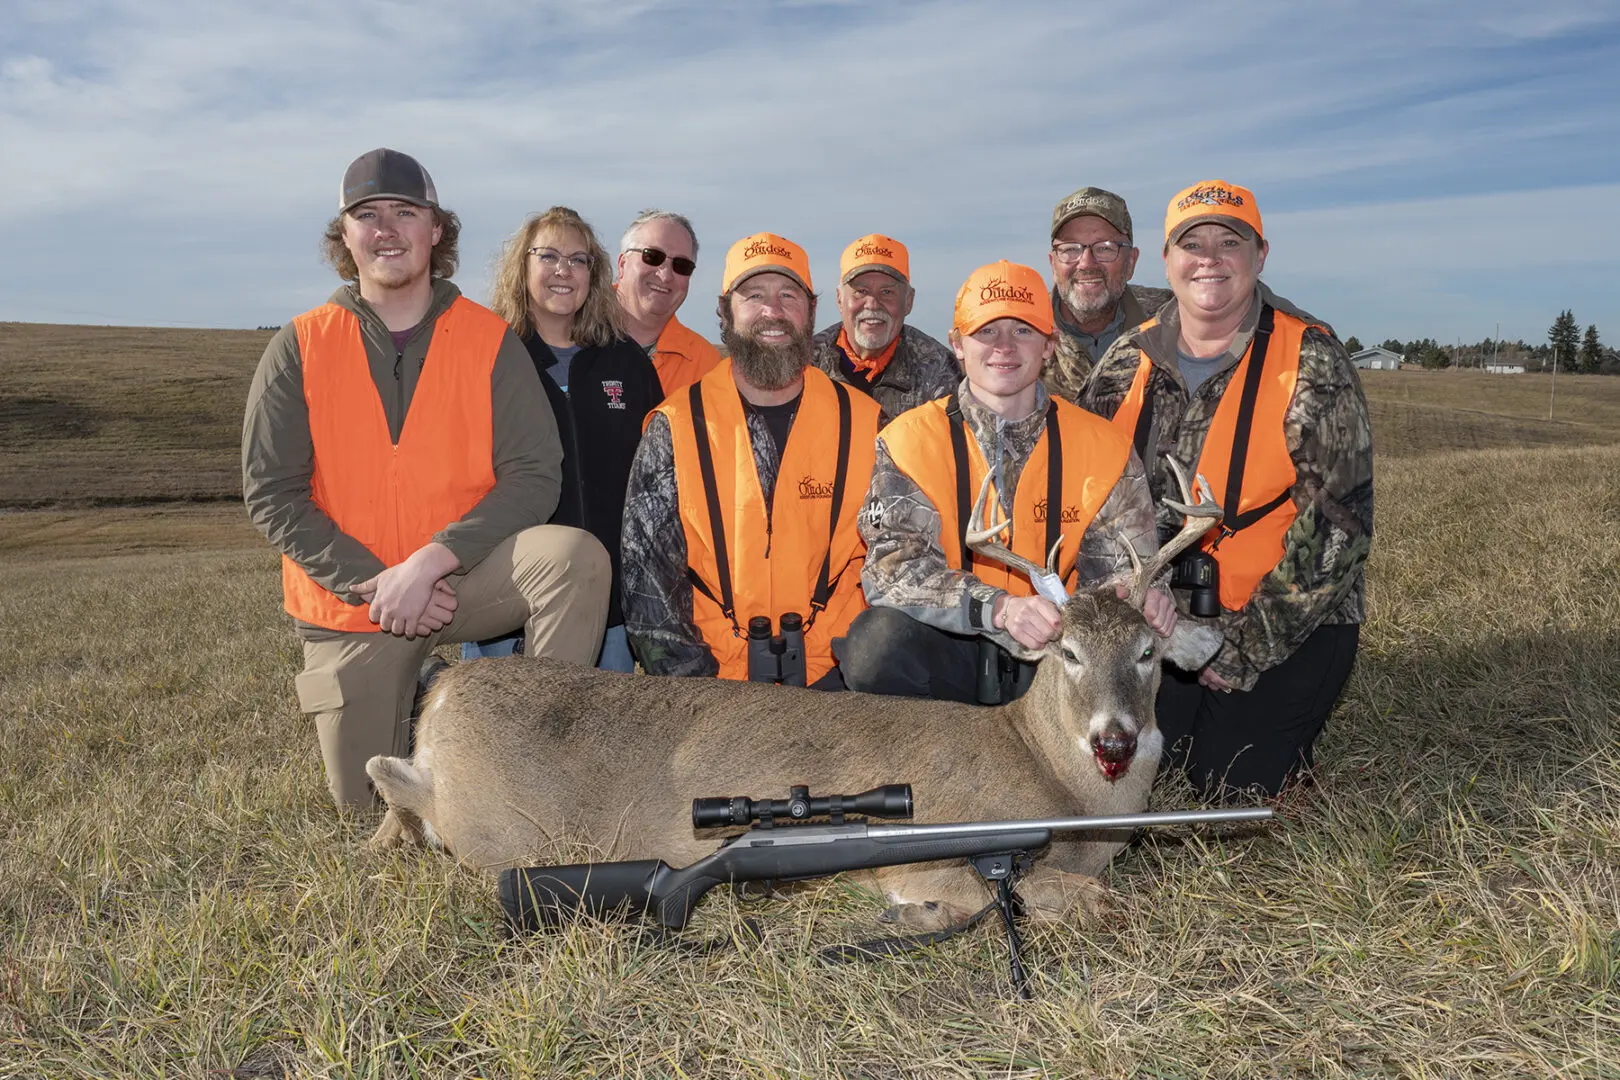 From left to right Tyler Brusseau, Carol Brusseau, Chad Brusseau, Taner Ohlsen, Brian Solum, Dash Ohlsen, Dave Lipp and Kara Ohlsen pose for a photo with Dash's white-tailed buck